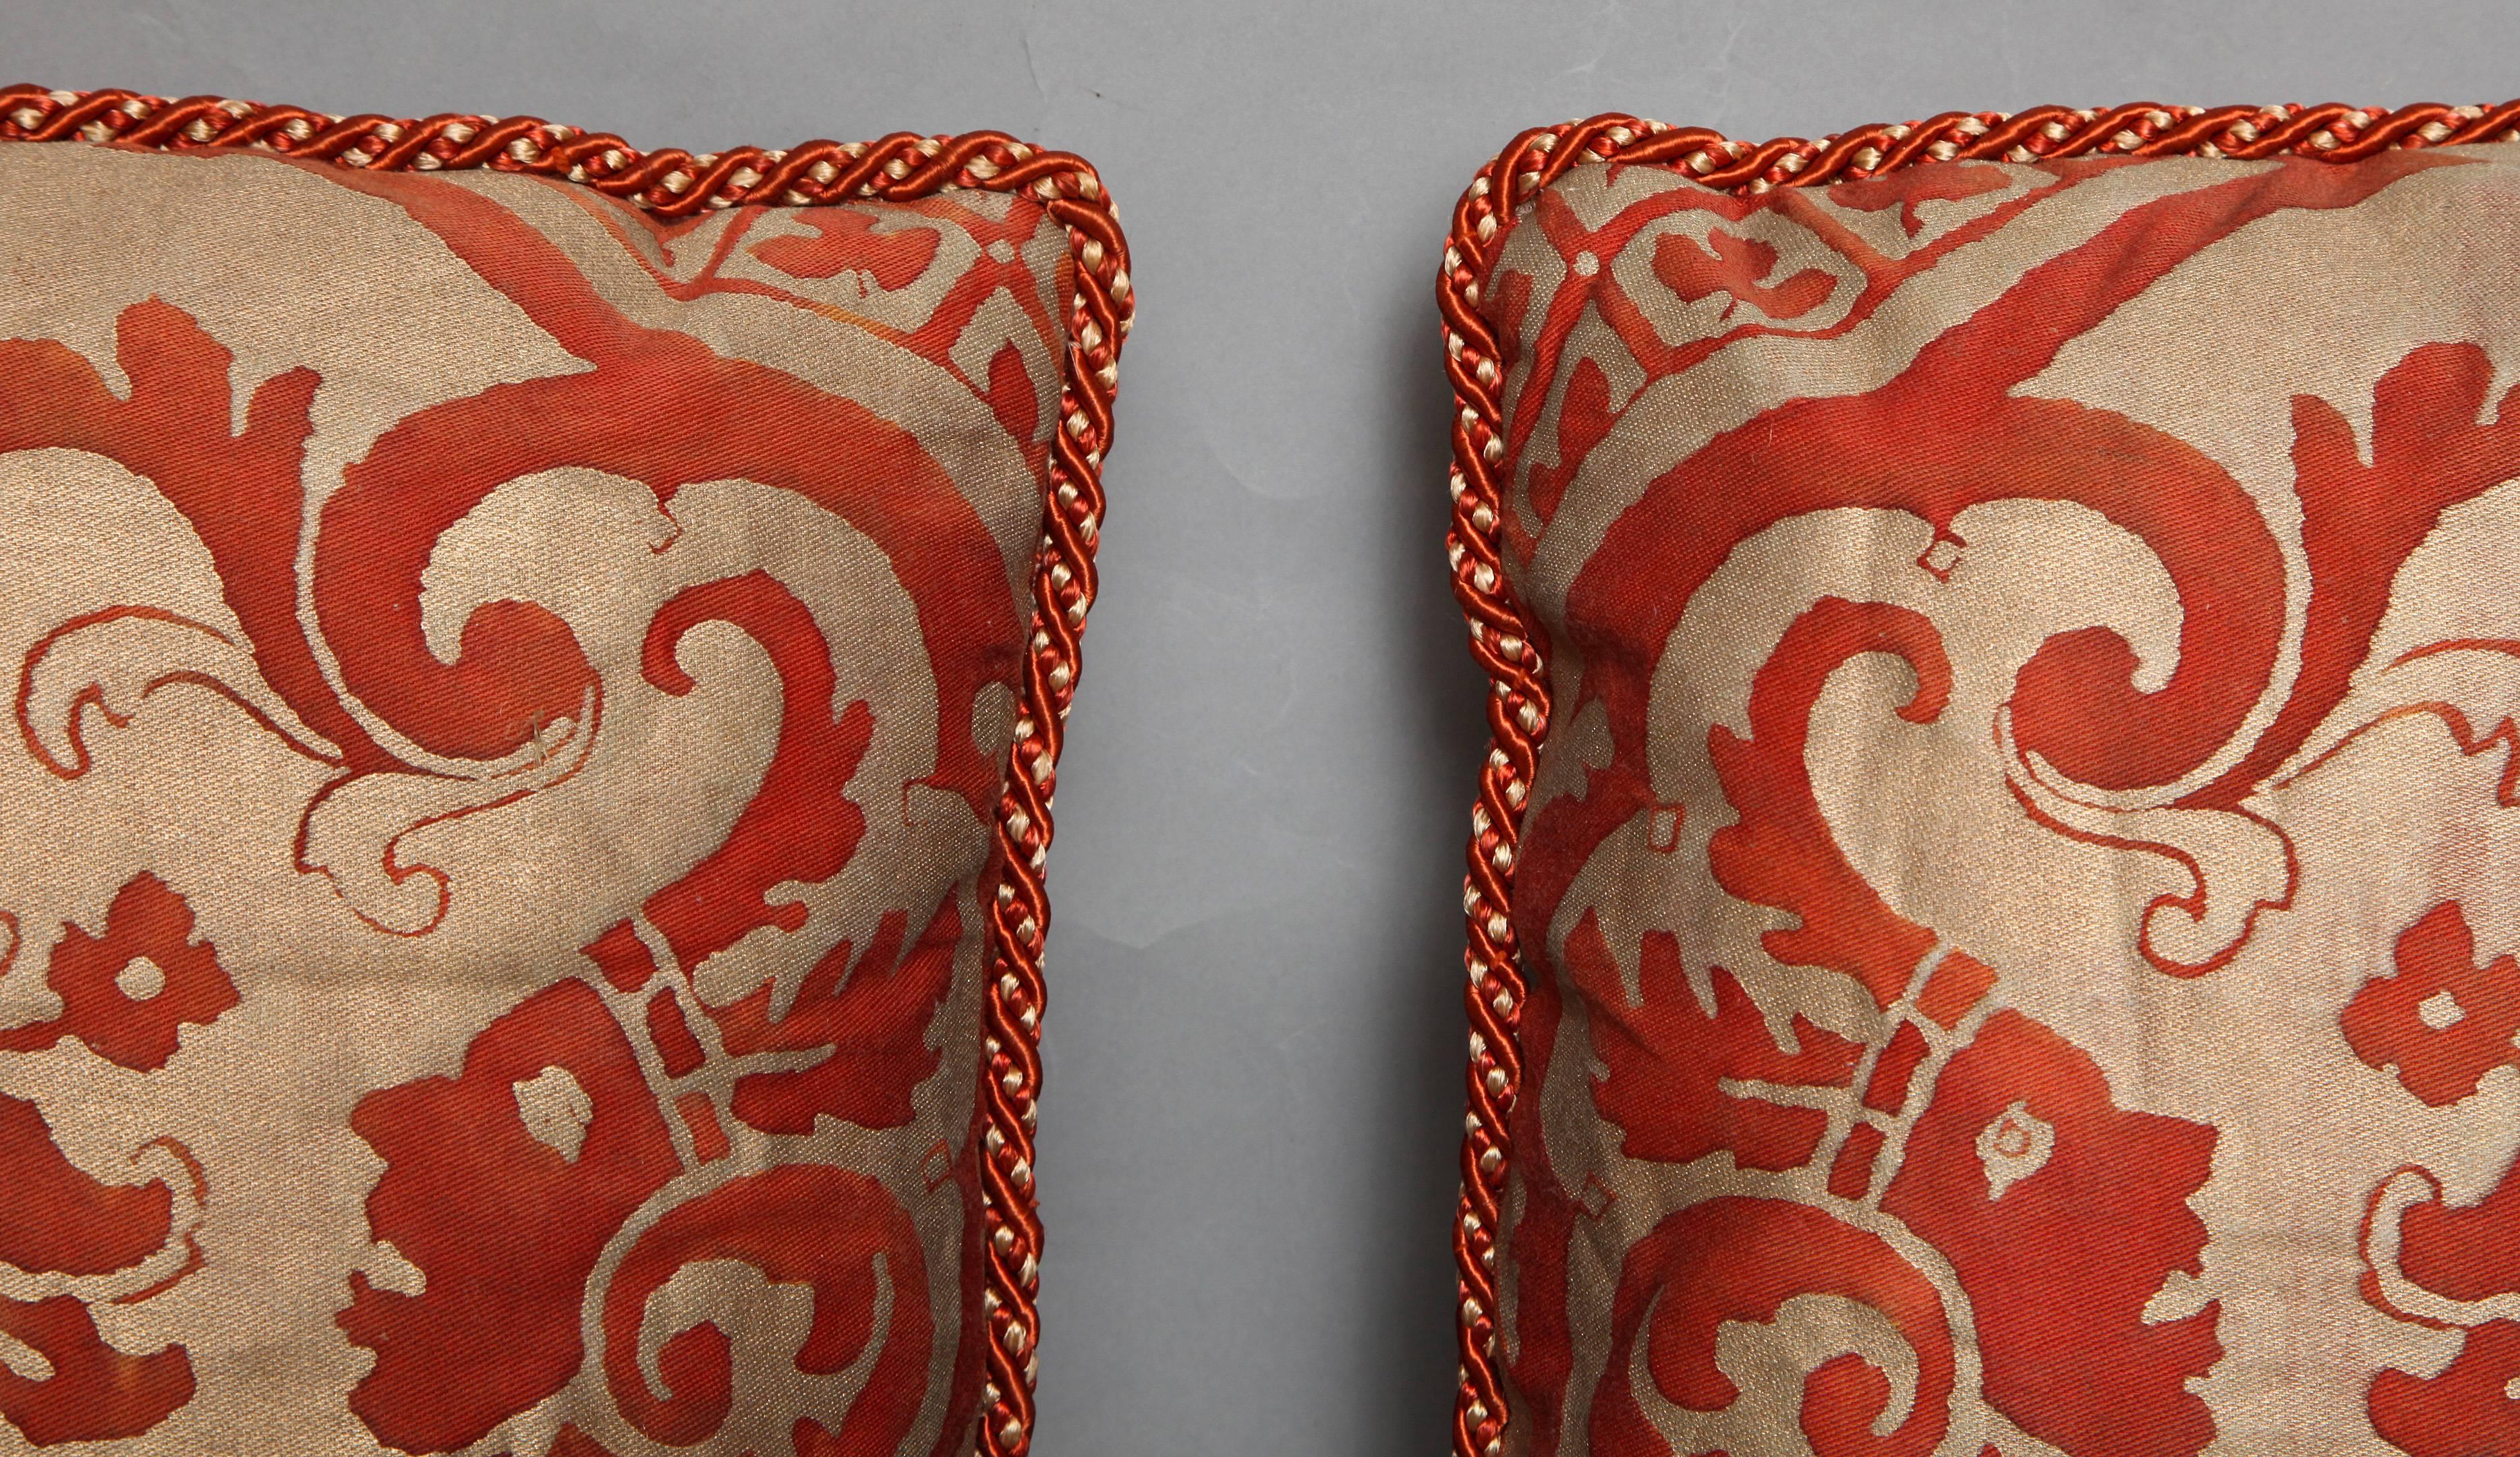 Other Pair of Fortuny Fabric Cushions in the Carnavalet Pattern